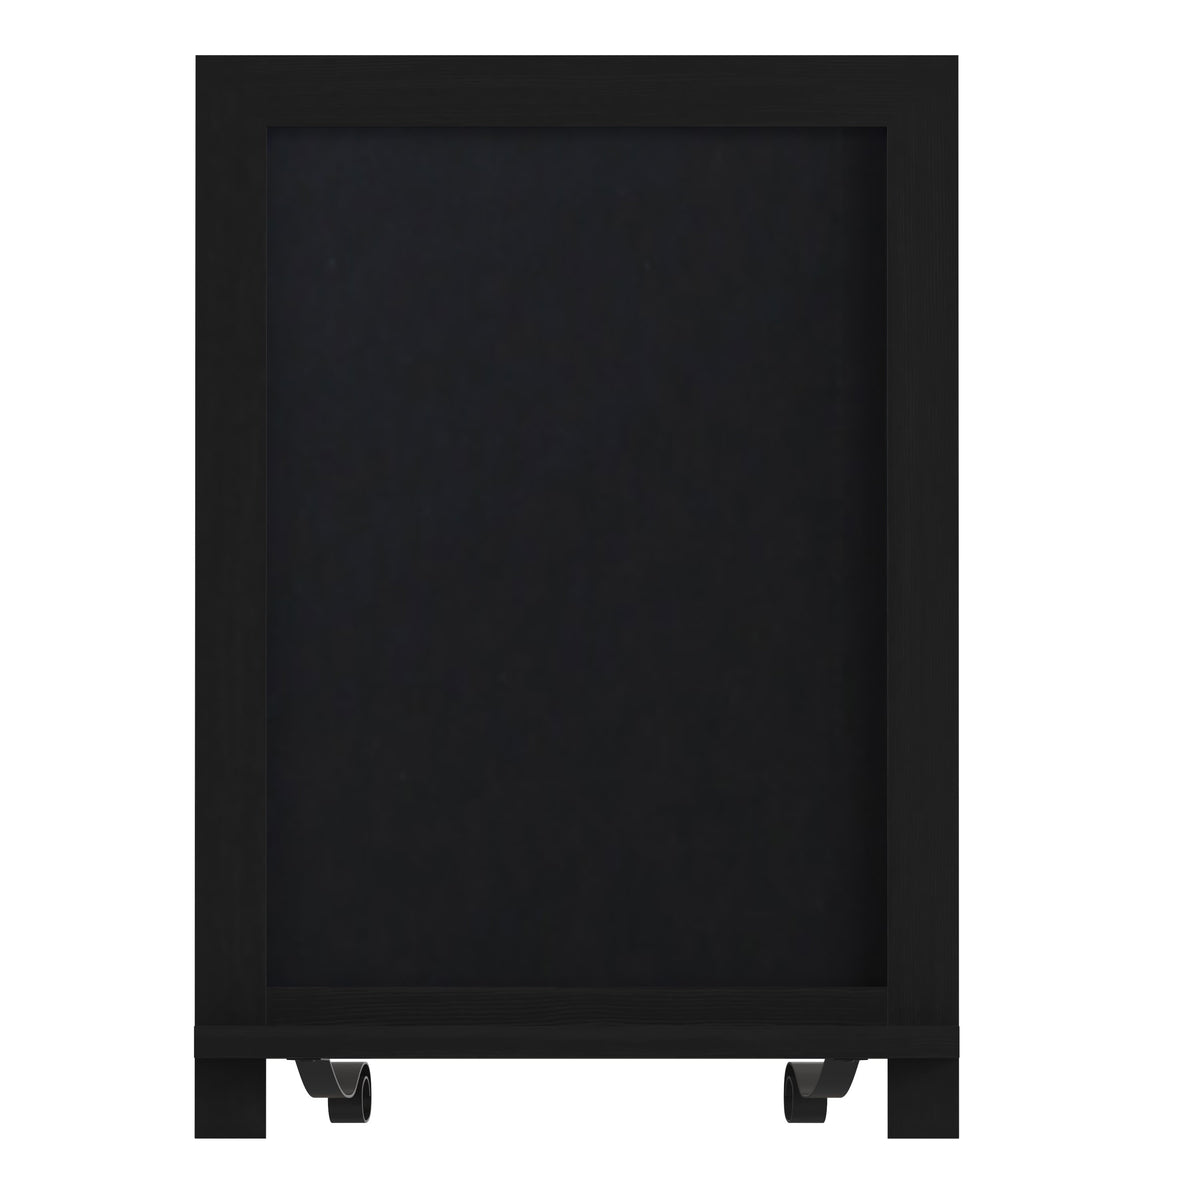 Black,12inchW x 1.88inchD x 17inchH |#| 10 Pack 12inch x 17inch Tabletop or Wall Mount Magnetic Chalkboards - Black